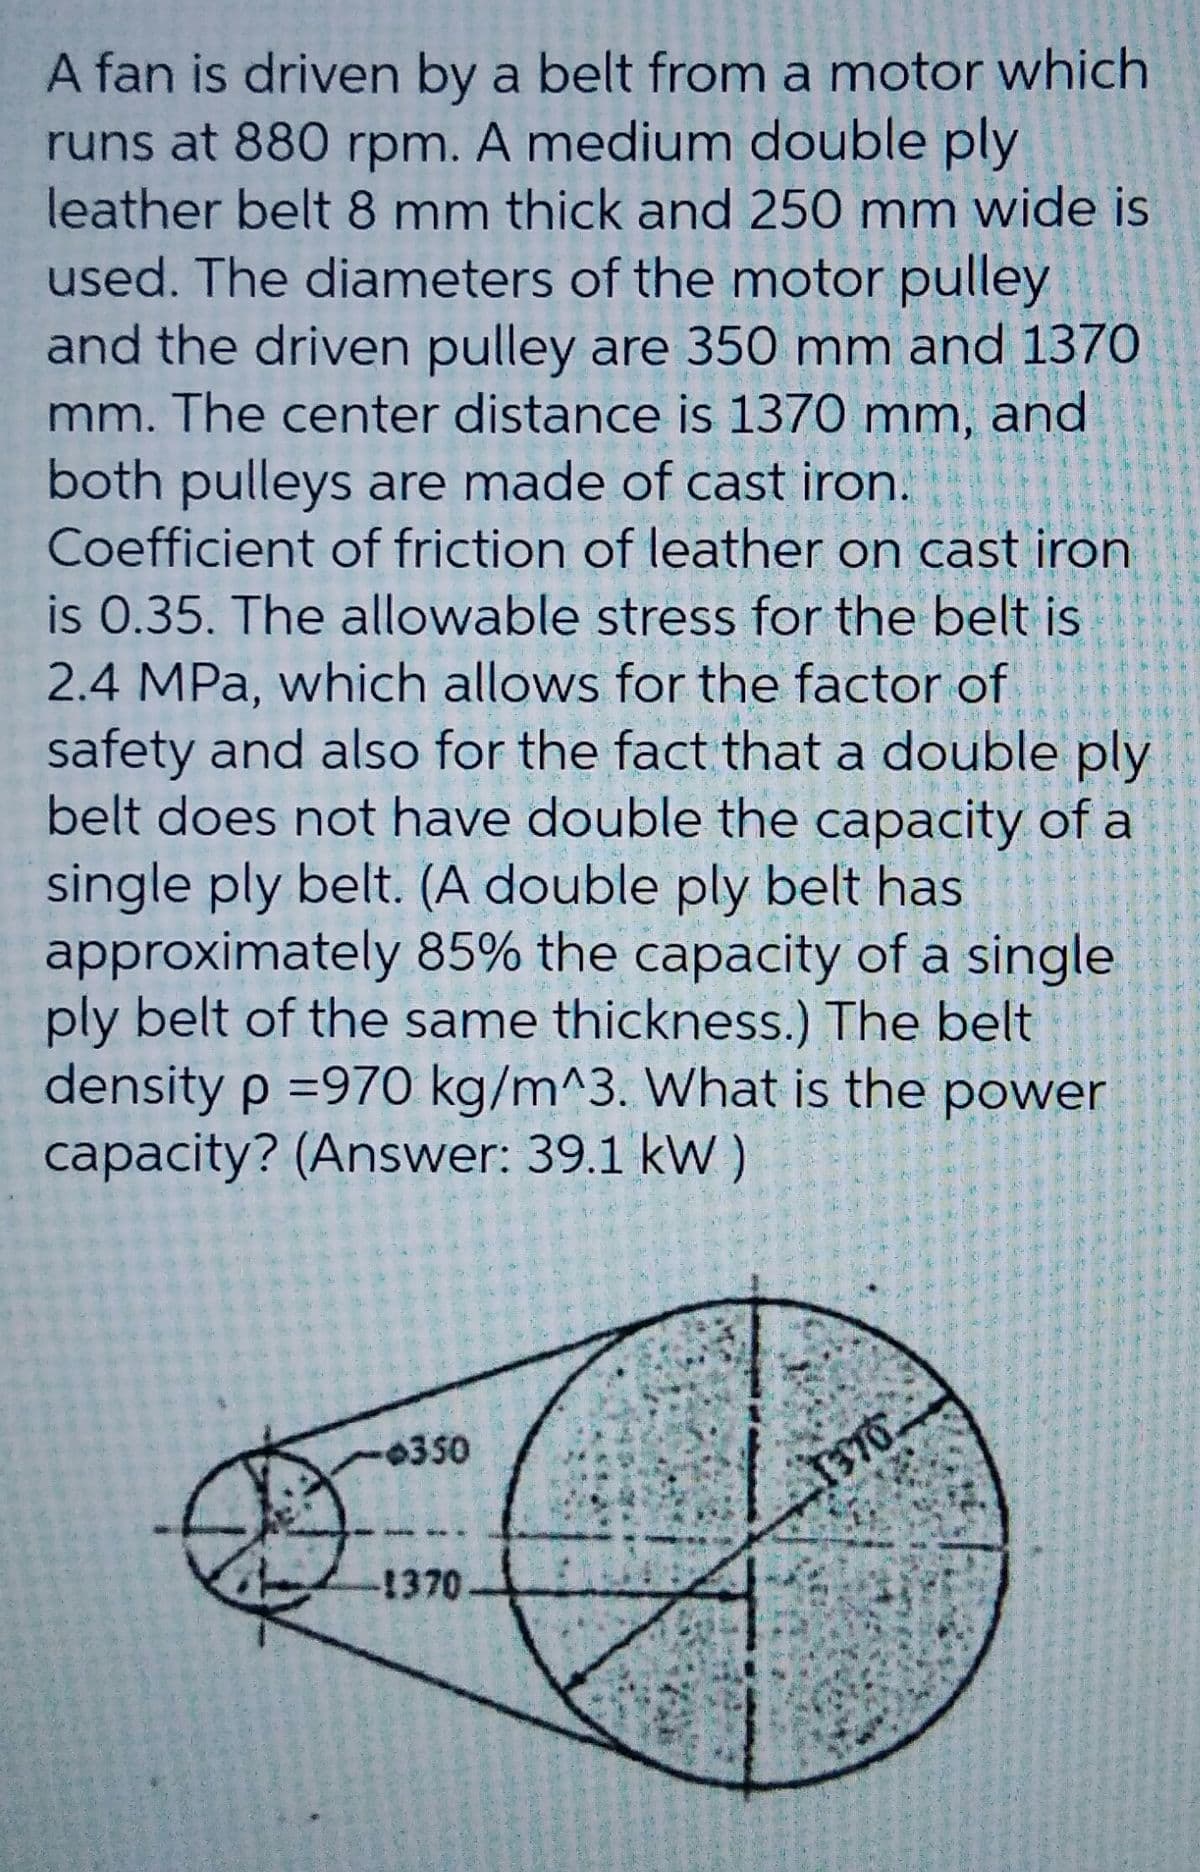 A fan is driven by a belt from a motor which
runs at 880 rpm. A medium double ply
leather belt 8 mm thick and 250 mm wide is
used. The diameters of the motor pulley
and the driven pulley are 350 mm and 1370
mm. The center distance is 1370 mm, and
both pulleys are made of cast iron.
Coefficient of friction of leather on cast iron
is 0.35. The allowable stress for the belt is
2.4 MPa, which allows for the factor of
safety and also for the fact that a double ply
belt does not have double the capacity of a
single ply belt. (A double ply belt has
approximately 85% the capacity of a single
ply belt of the same thickness.) The belt
density p =970 kg/m^3. What is the power
capacity? (Answer: 39.1 kW )
-0350
-1370
